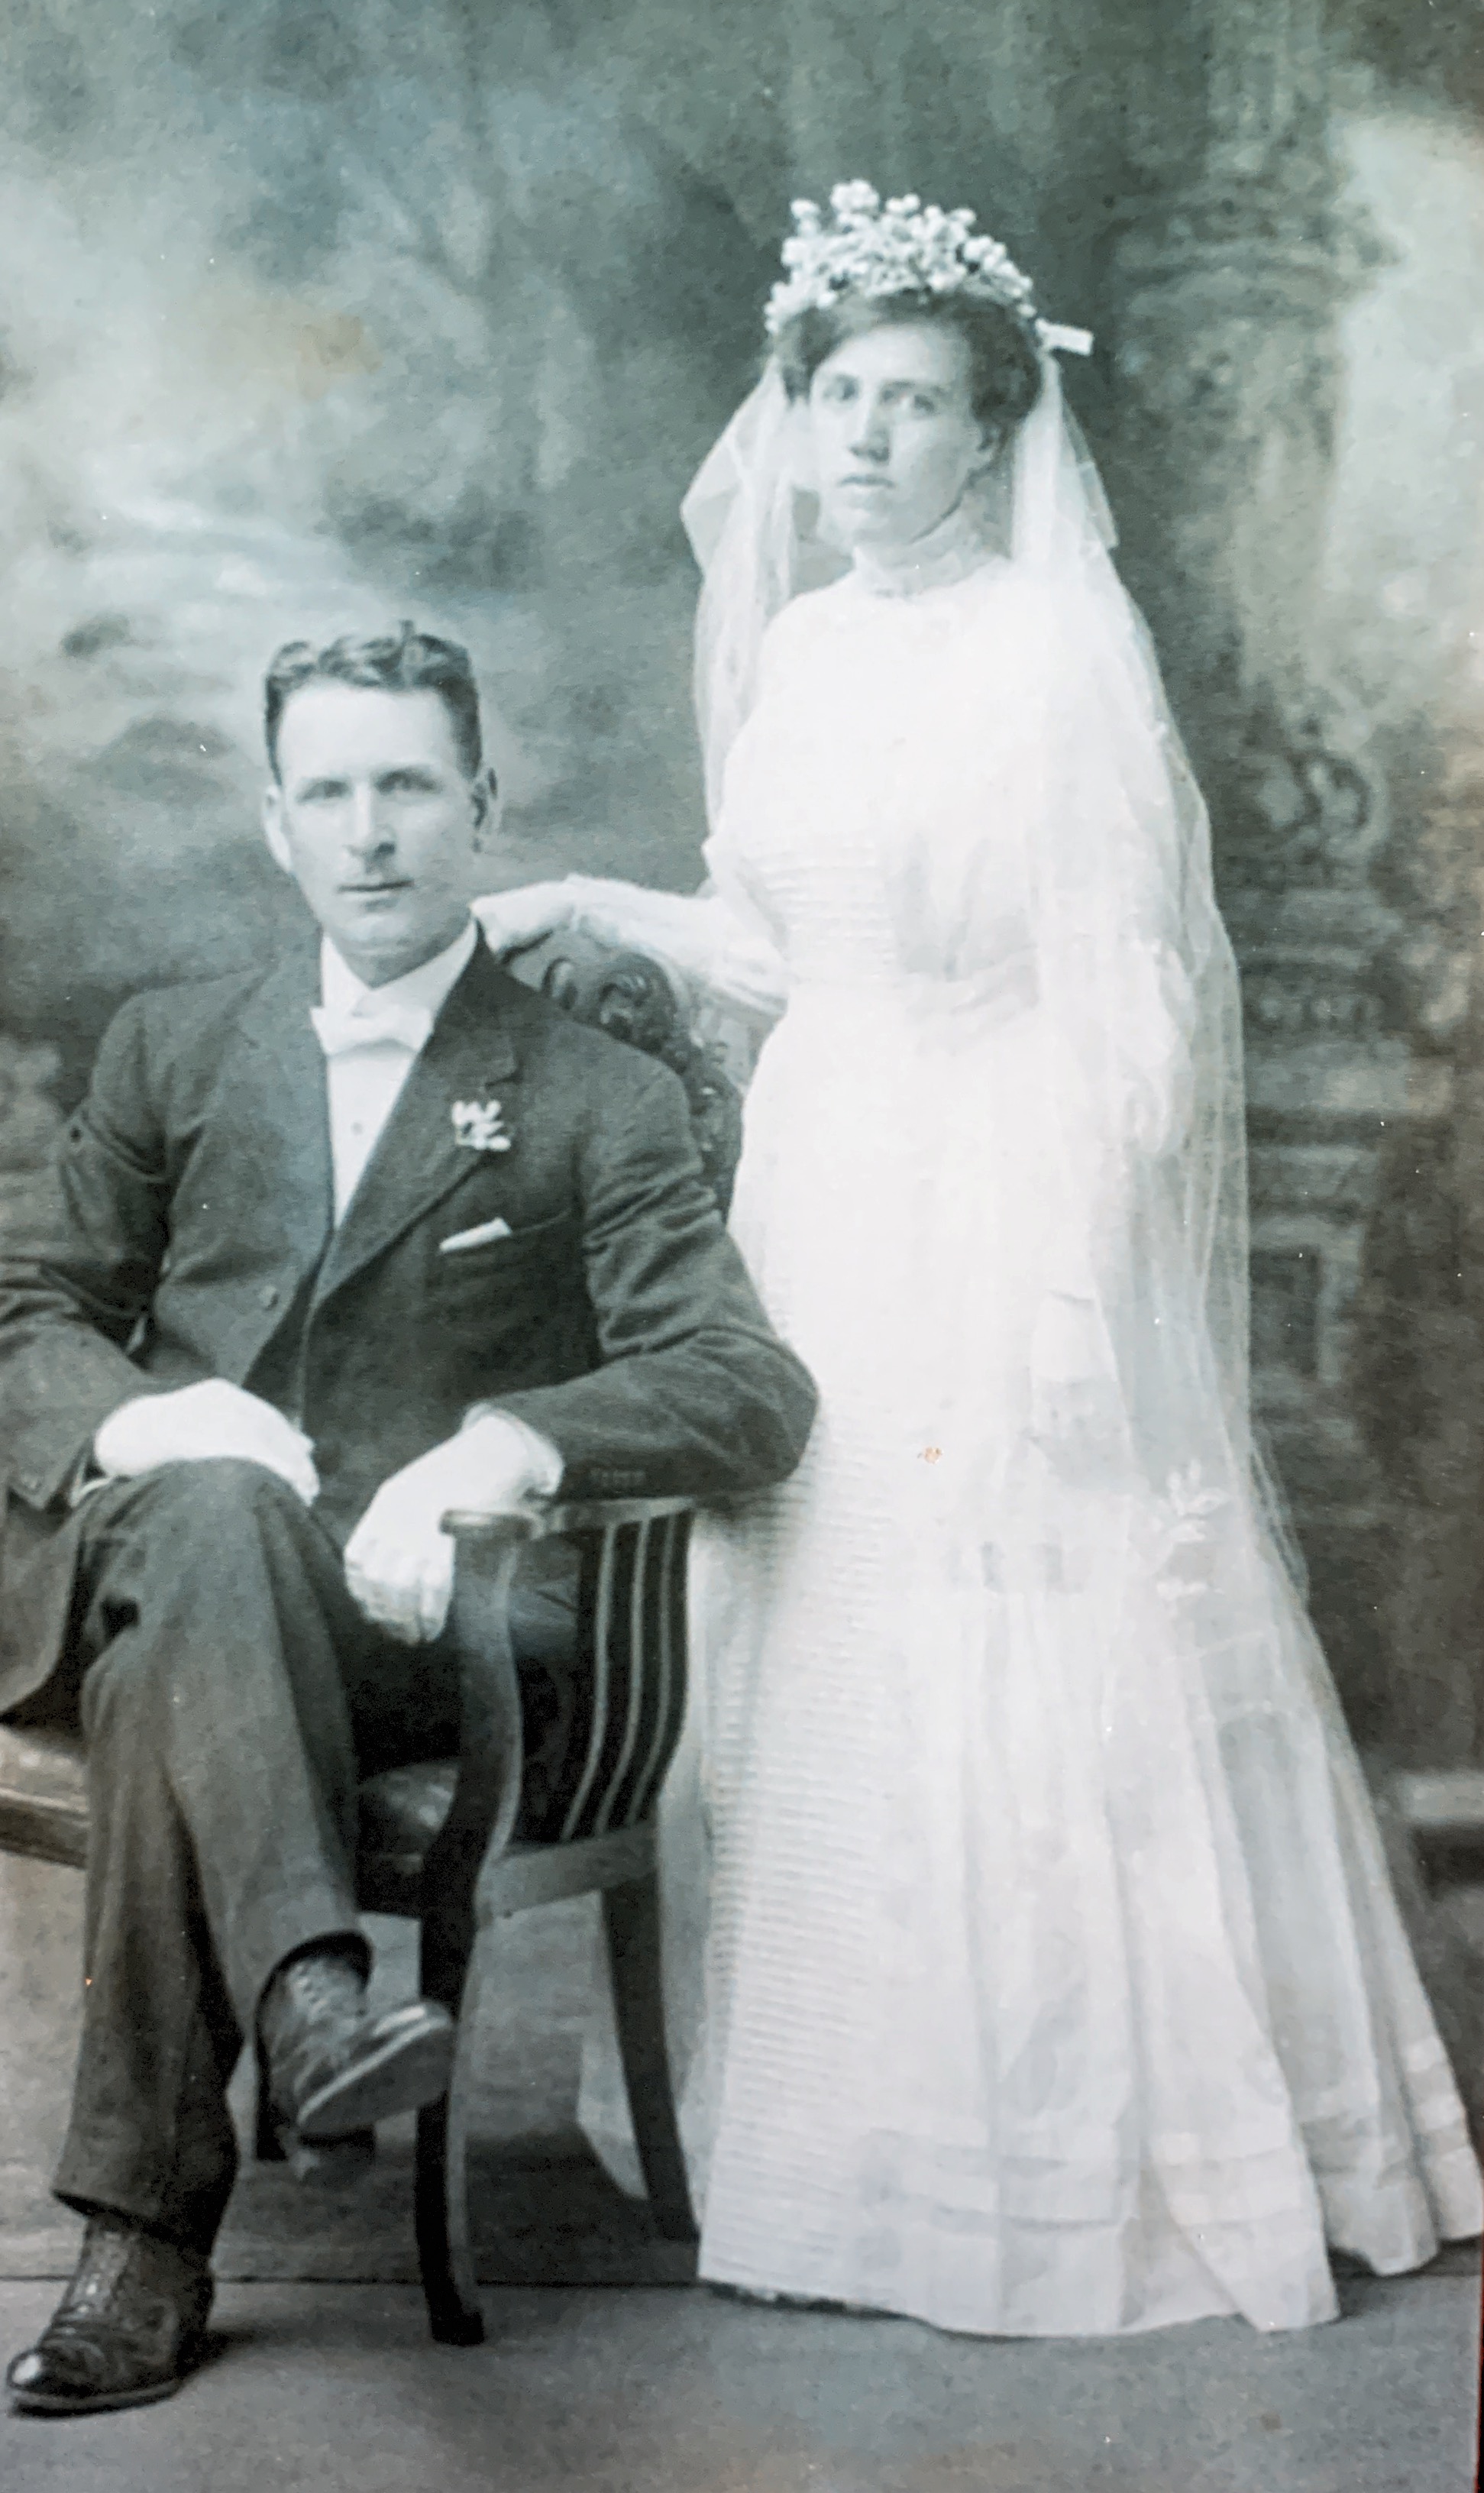 Your Paternal (male line) Great Great (2X) Grandparents George ‘Nelson’ Joyce and Harriet (born Strickland) Joyce of Victoria BC marry in Summer of 1910 in Harriet’s cousins’ garden - the Billard family’s House on Davie St. Victoria. They lived over a block and were all from Newfoundland, Canada’s most Eastern Maritime Province.